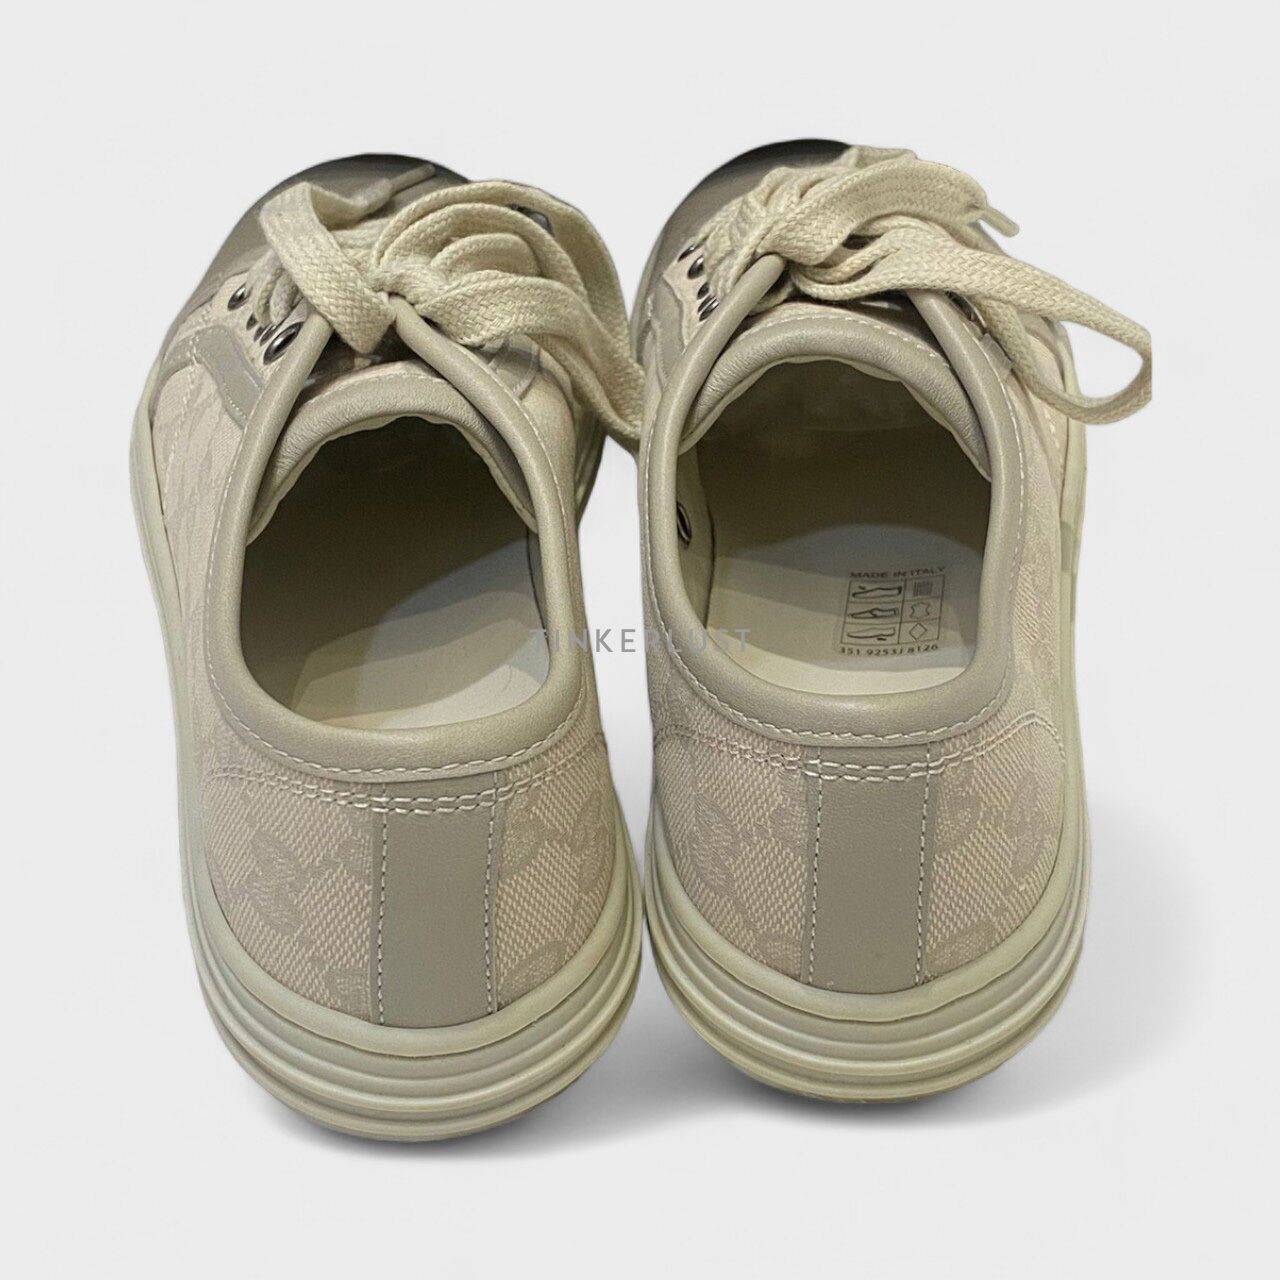 Gucci GG Beige Canvas Sneakers